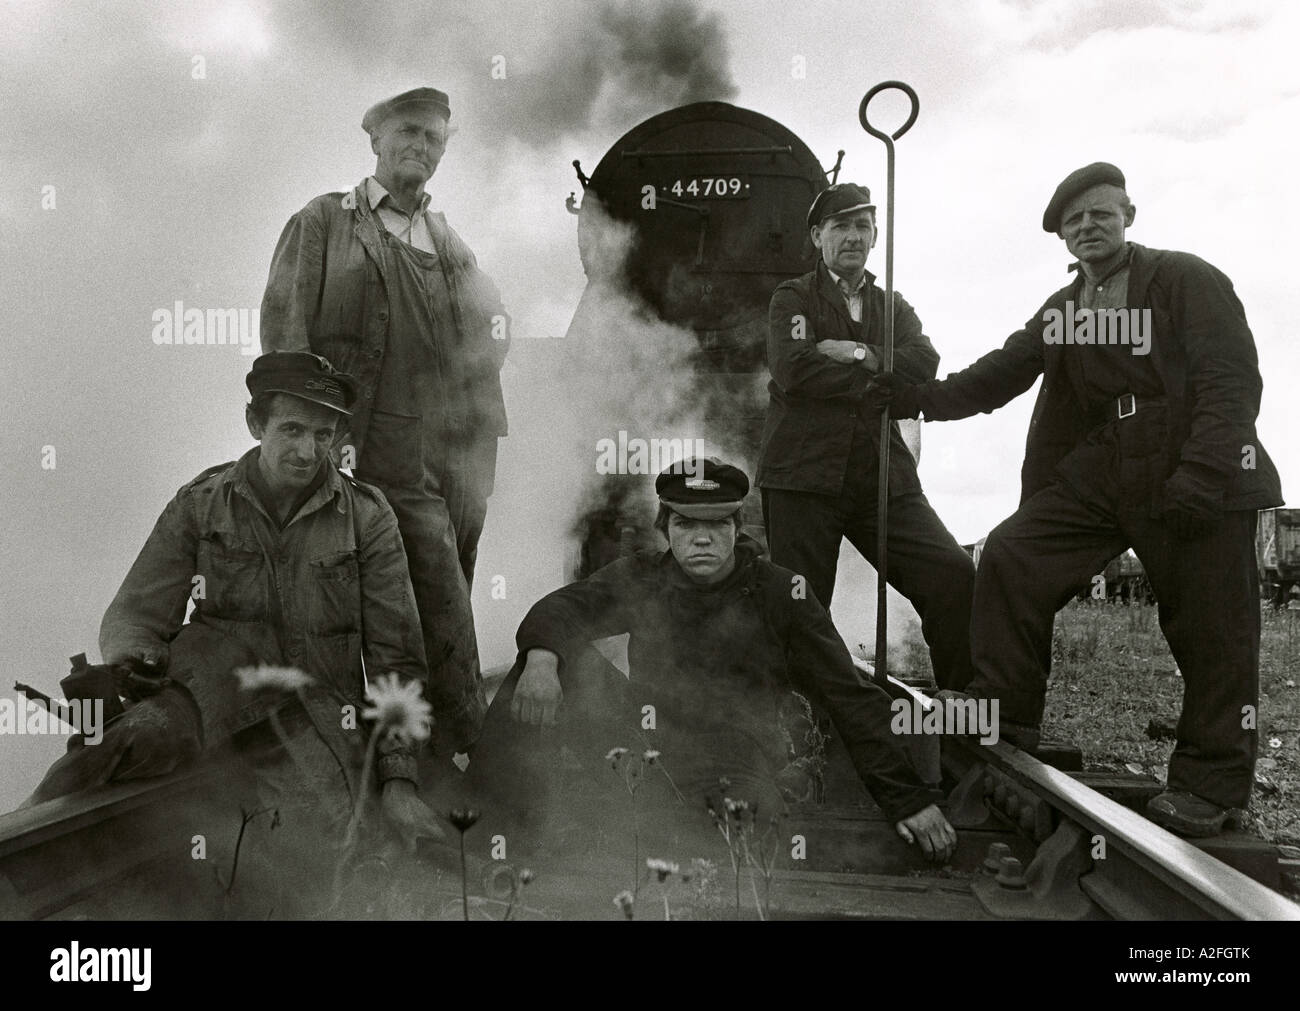 Five railwaymen whose jobs disappeared with the end of steam locomotives photographed in last week of steam railways in 1968 Stock Photo